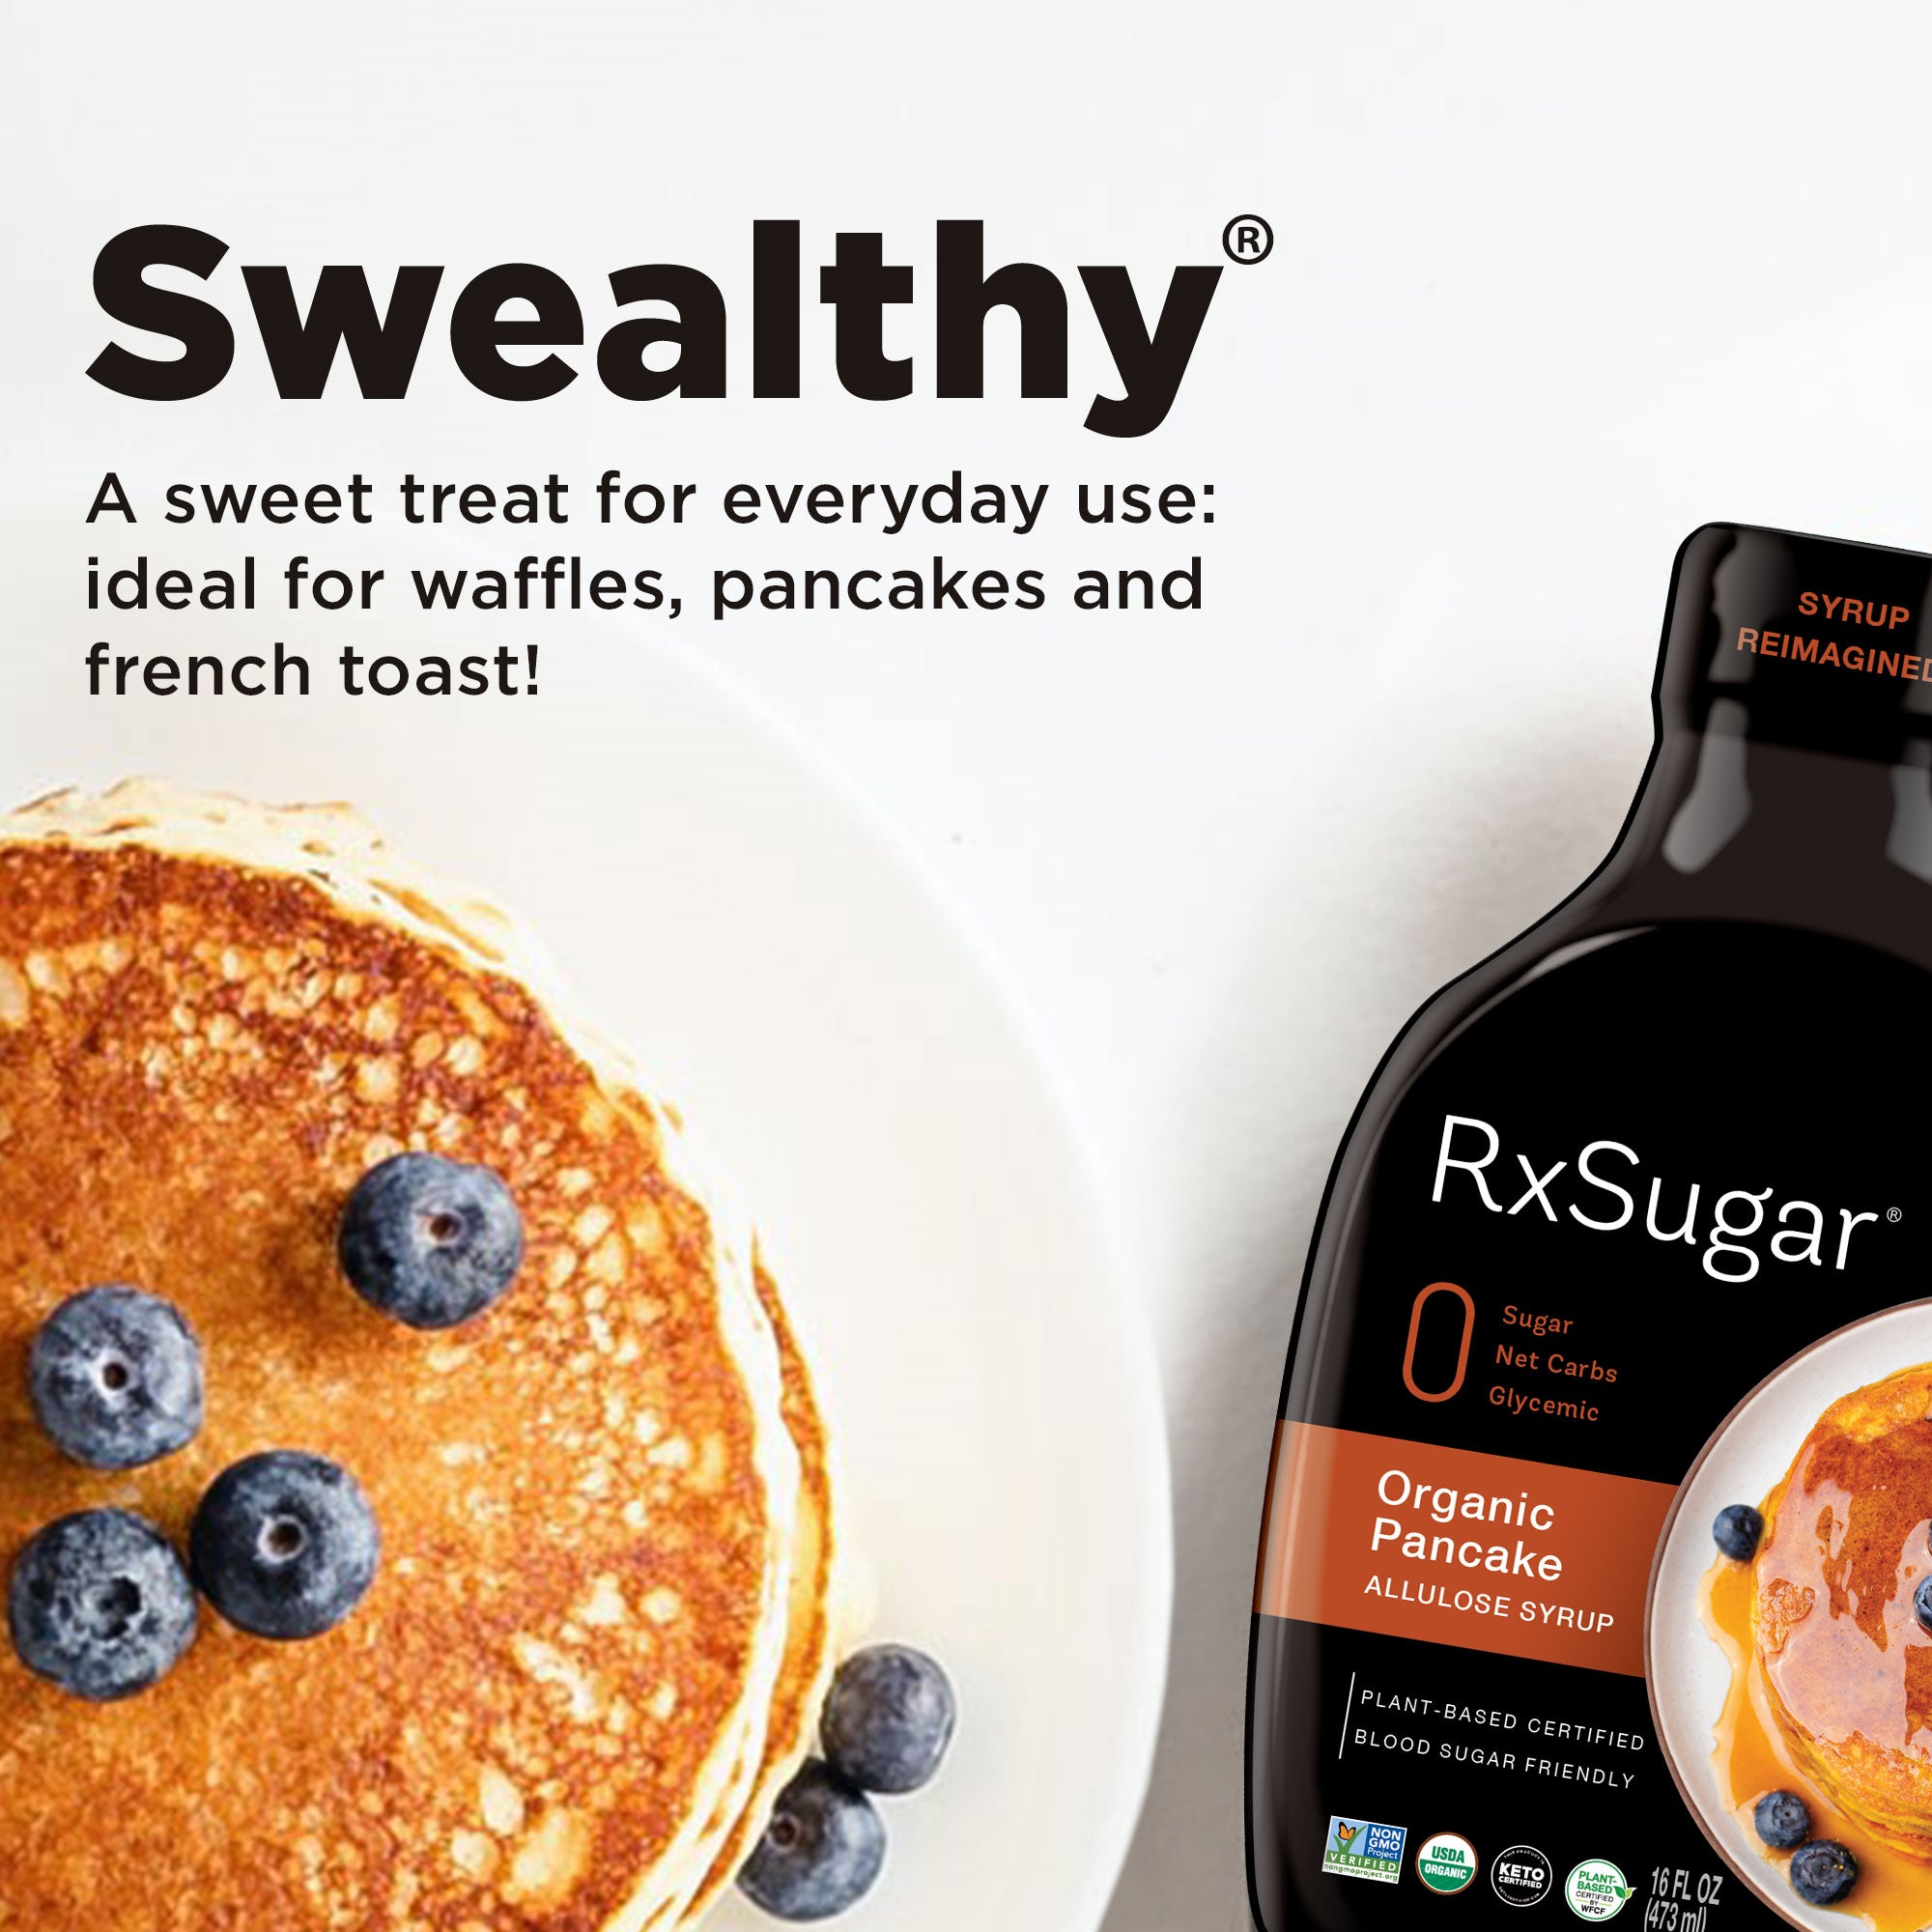 A sweet treat for everyday use: ideal for waffles, pancakes and french toast!